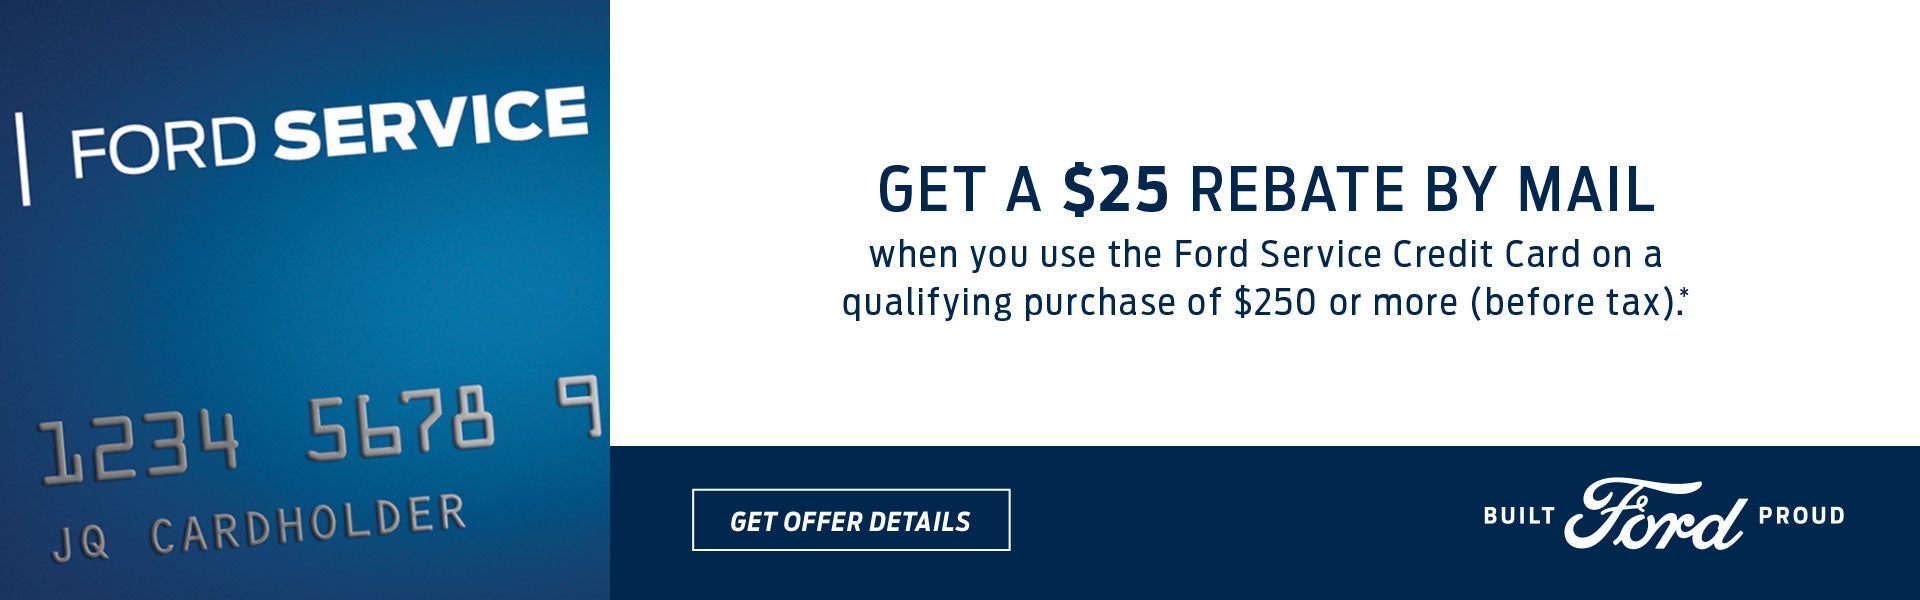 Get a $25 rebate by mail when you use the Ford Service Credit Card on a qualifying purchase of $250 or more (before tax).* Click here to print this offer.